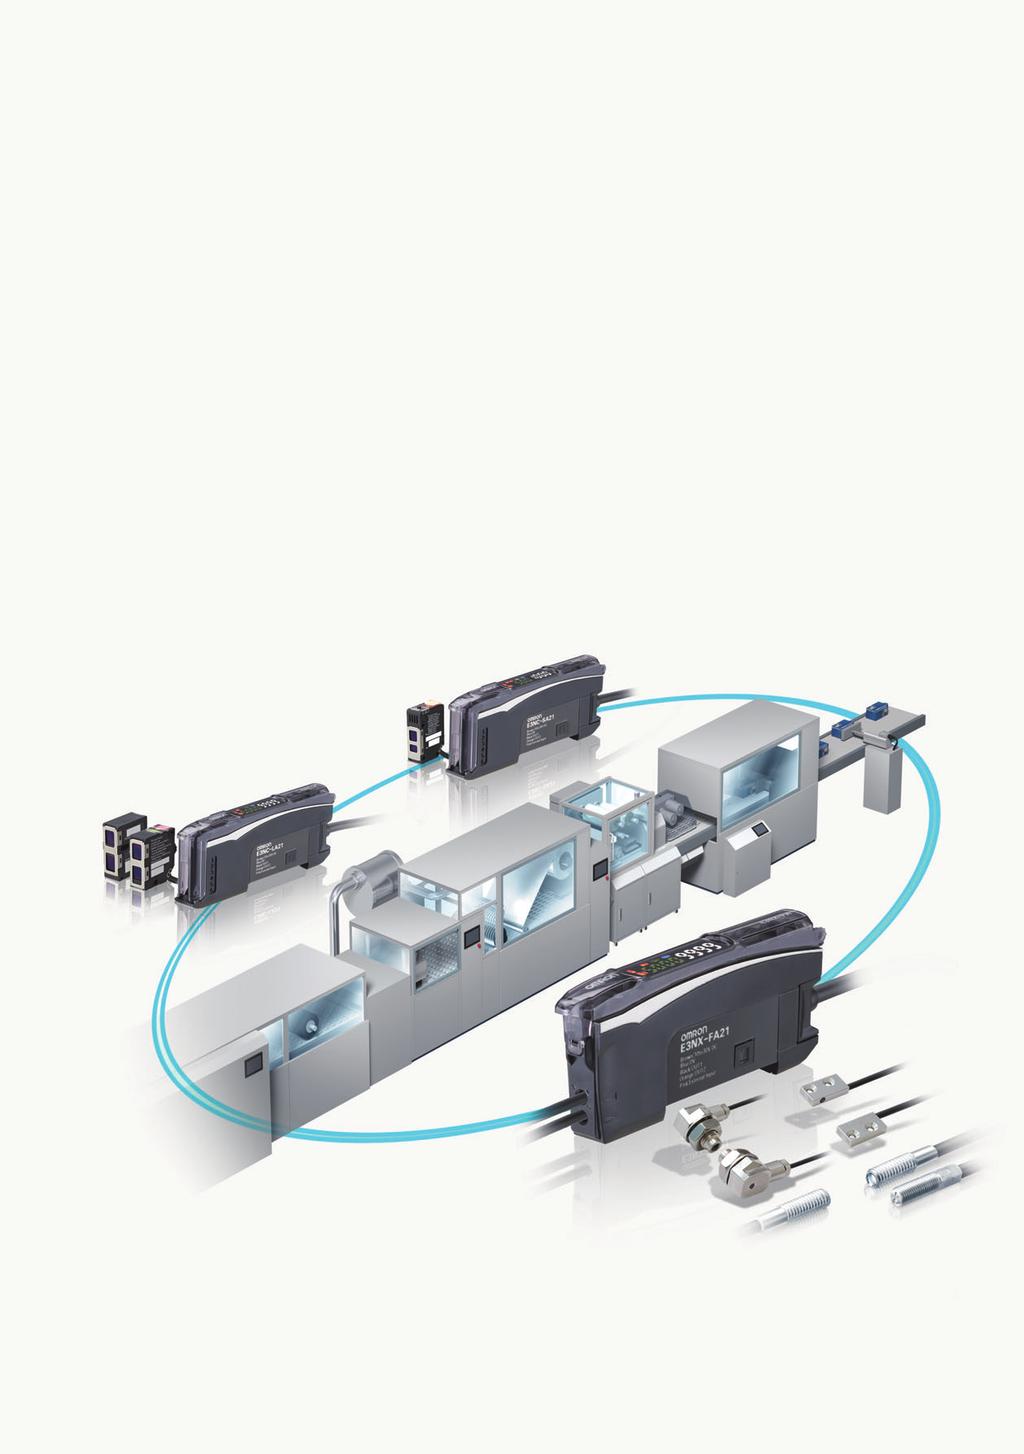 Presence Measurement Simple and Dependable The N-Smart Lineup of Next-generation Fiber Sensors and Laser Sensors will quickly solve your problems, increasing equipment operation rates while